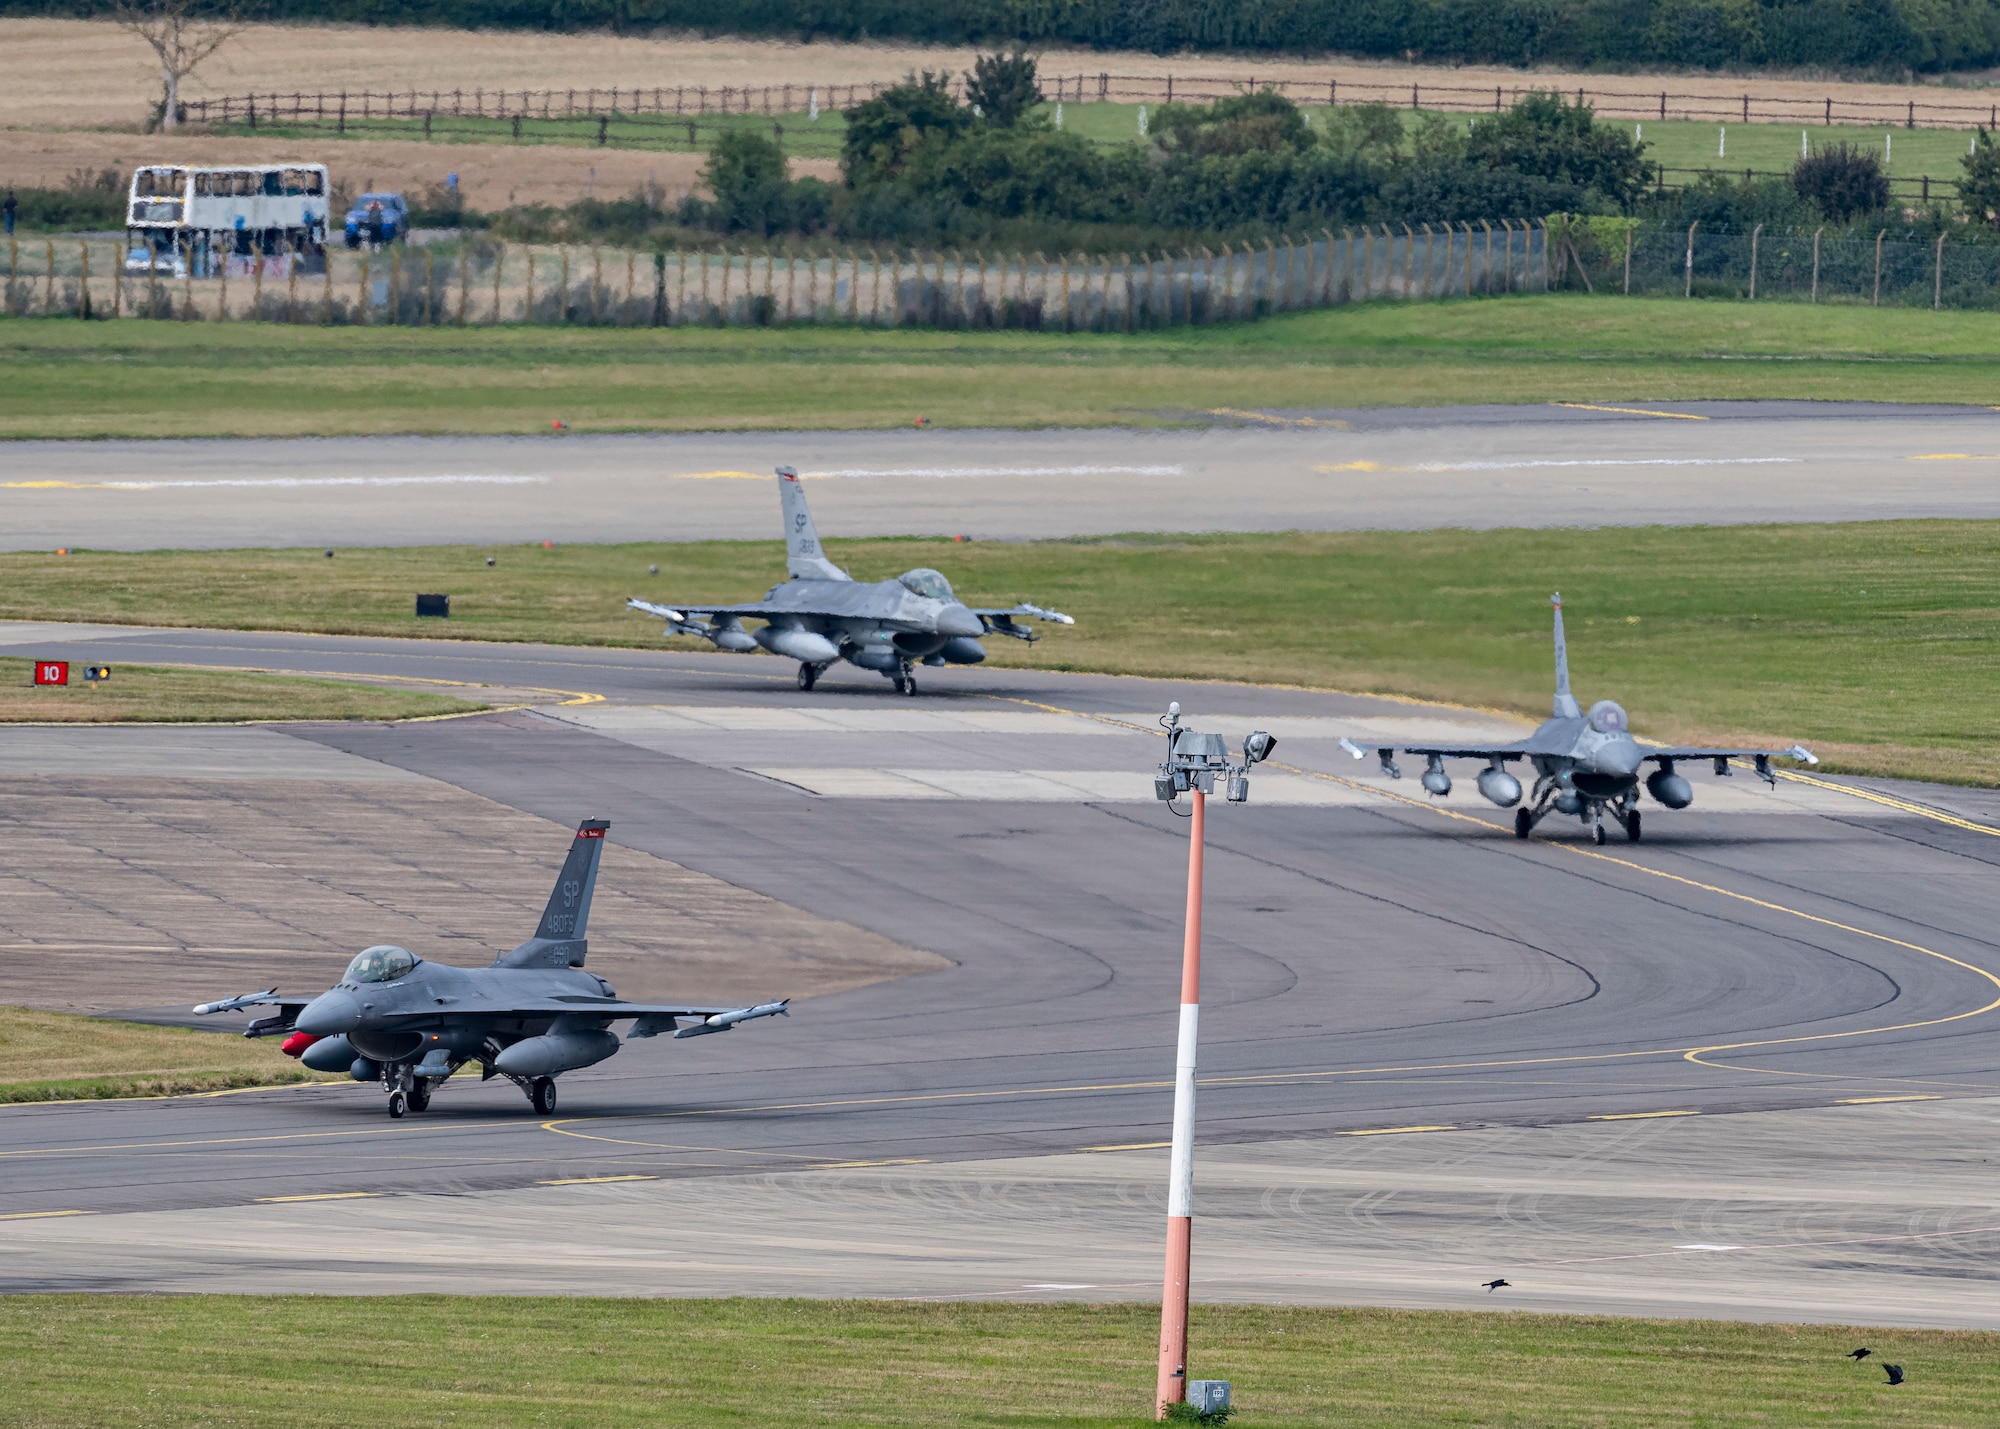 Cobra Warrior 23-2 is the United Kingdom Royal Air Force’s premier exercise focusing on operational to tactical high-end spectrum warfighting in a contested, degraded and limited operating environment.